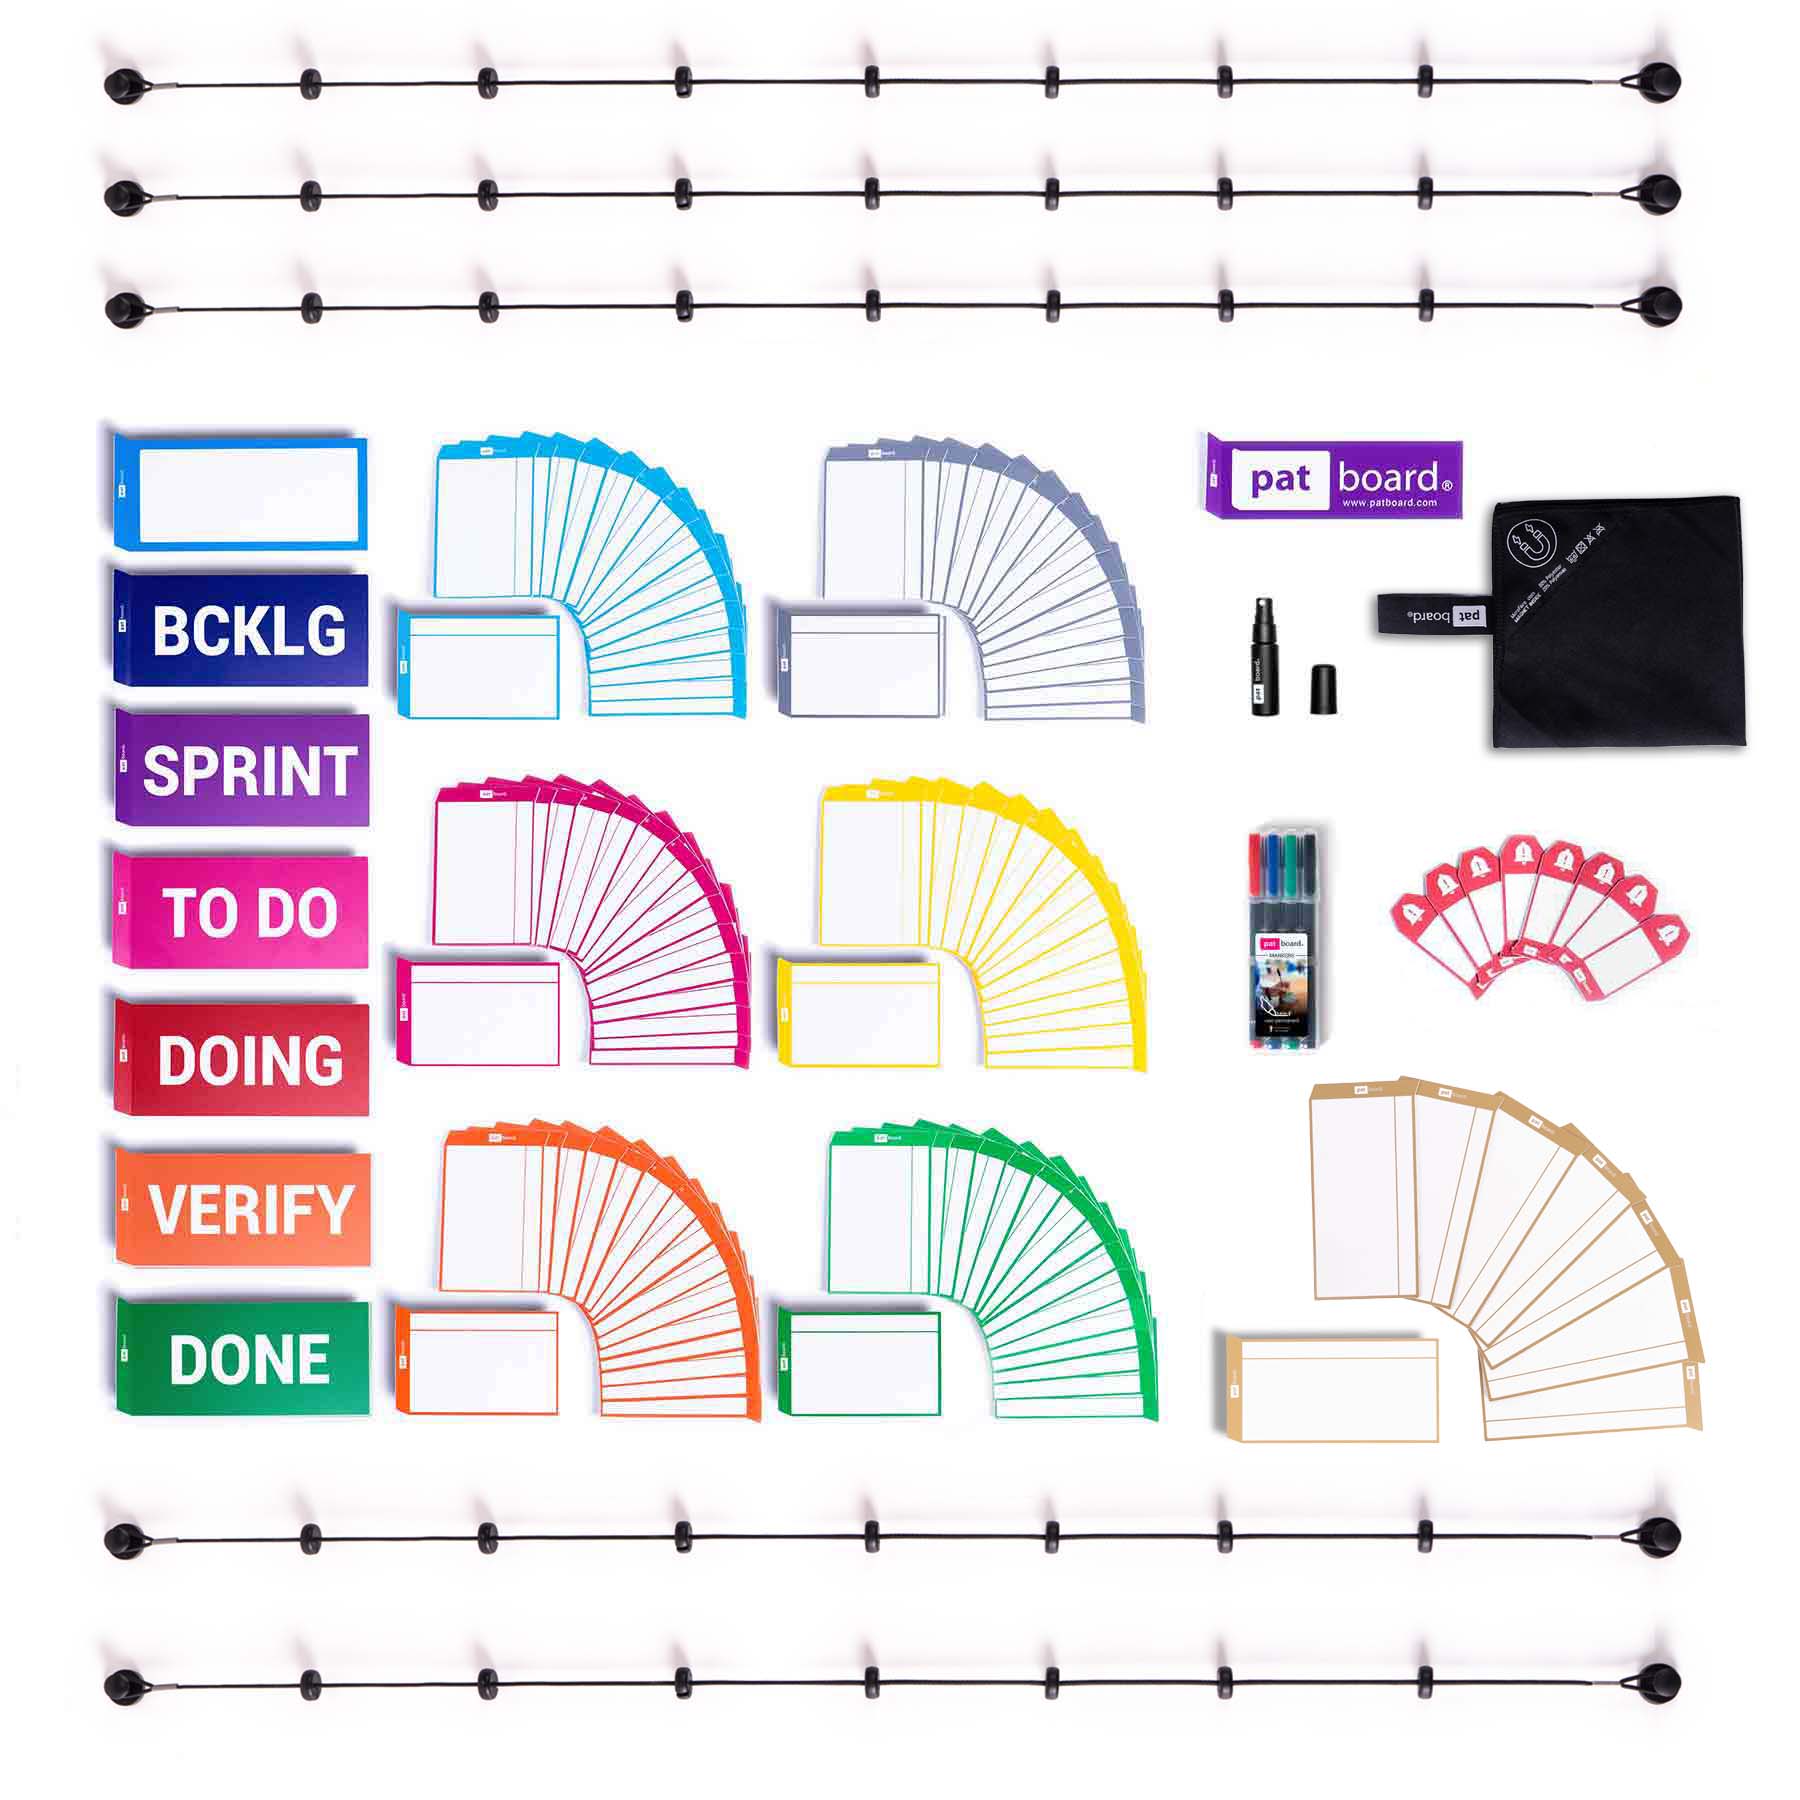 Scrum Magnetic Cleaning Cloth and Marker 40 4x6 Magnetic Planning Cards Productivity Kanban Dry-Erase Planning Card Magnets by AgilePacks for Agile Planning Boards Meetings AgilePacks Pro Kit 